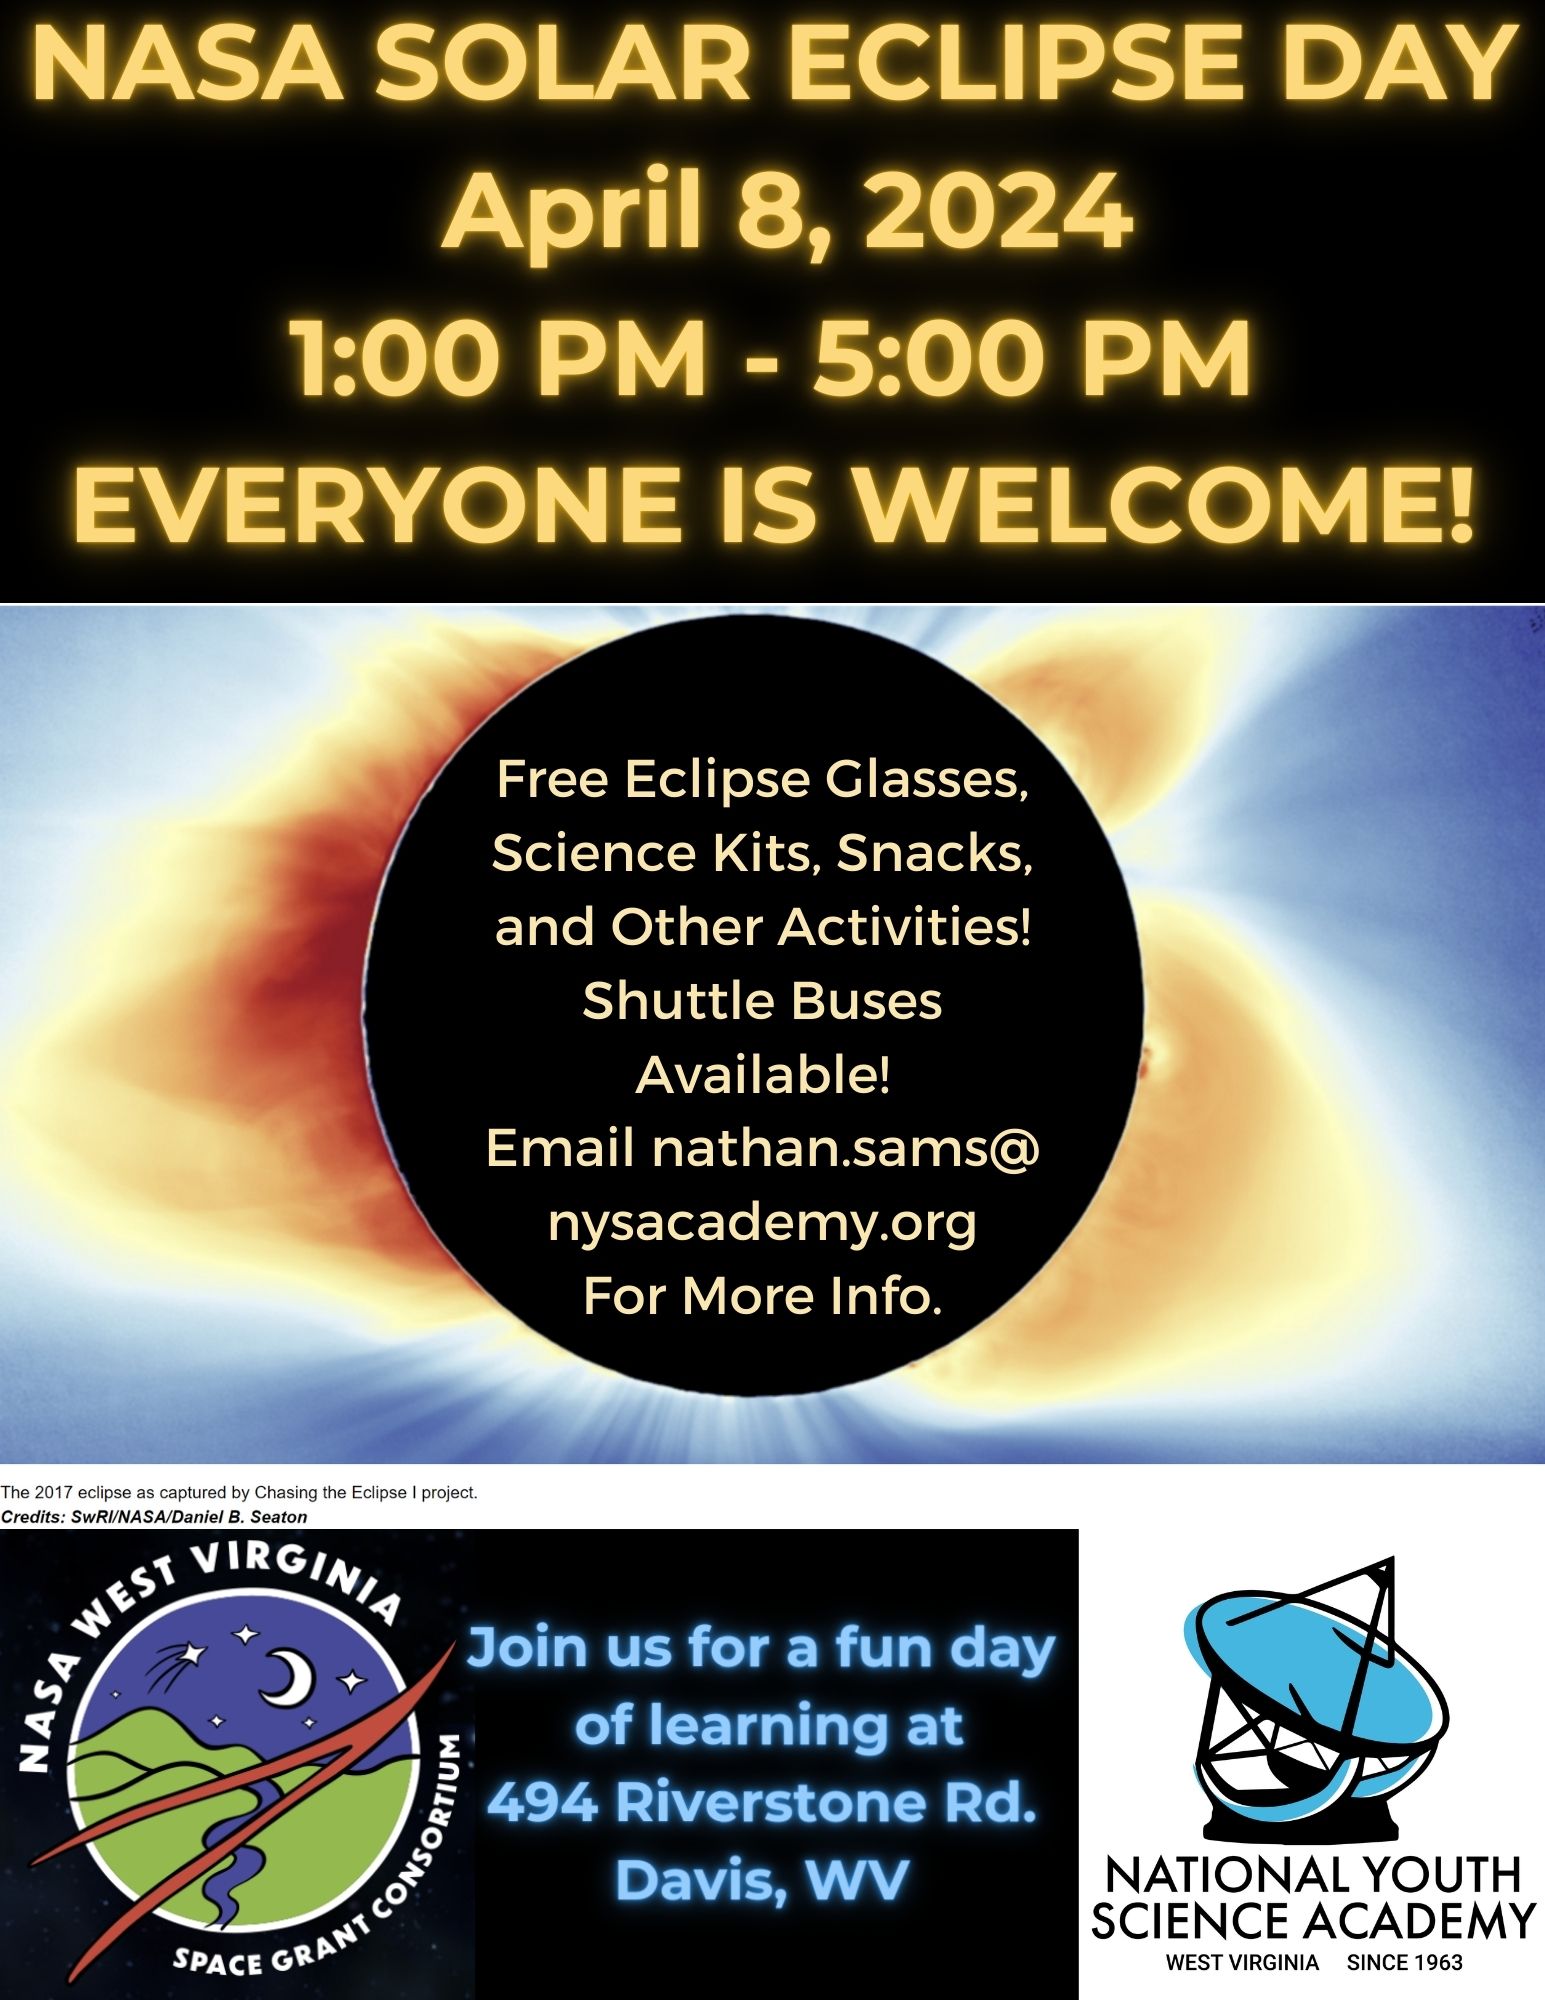 NASA Solar Eclipse Day April 8, 2024 National Youth Science Academy